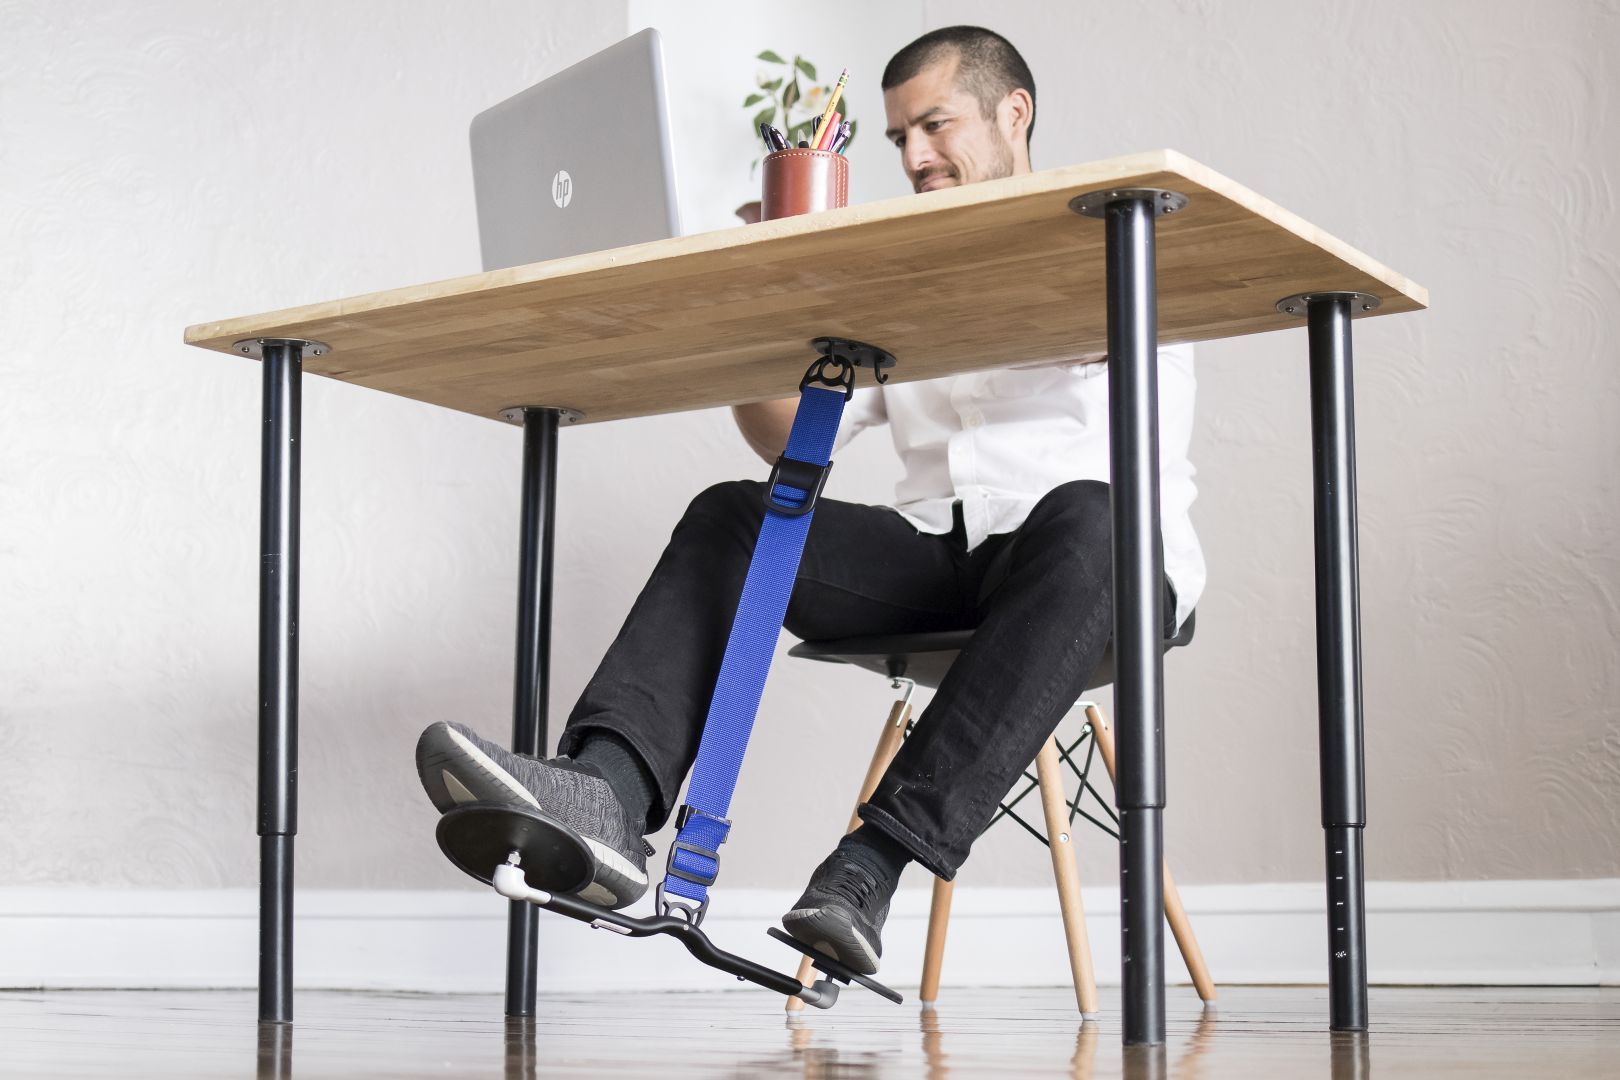 $59 HOVR Desk Swing Offers a Distraction-Free Seated Workout